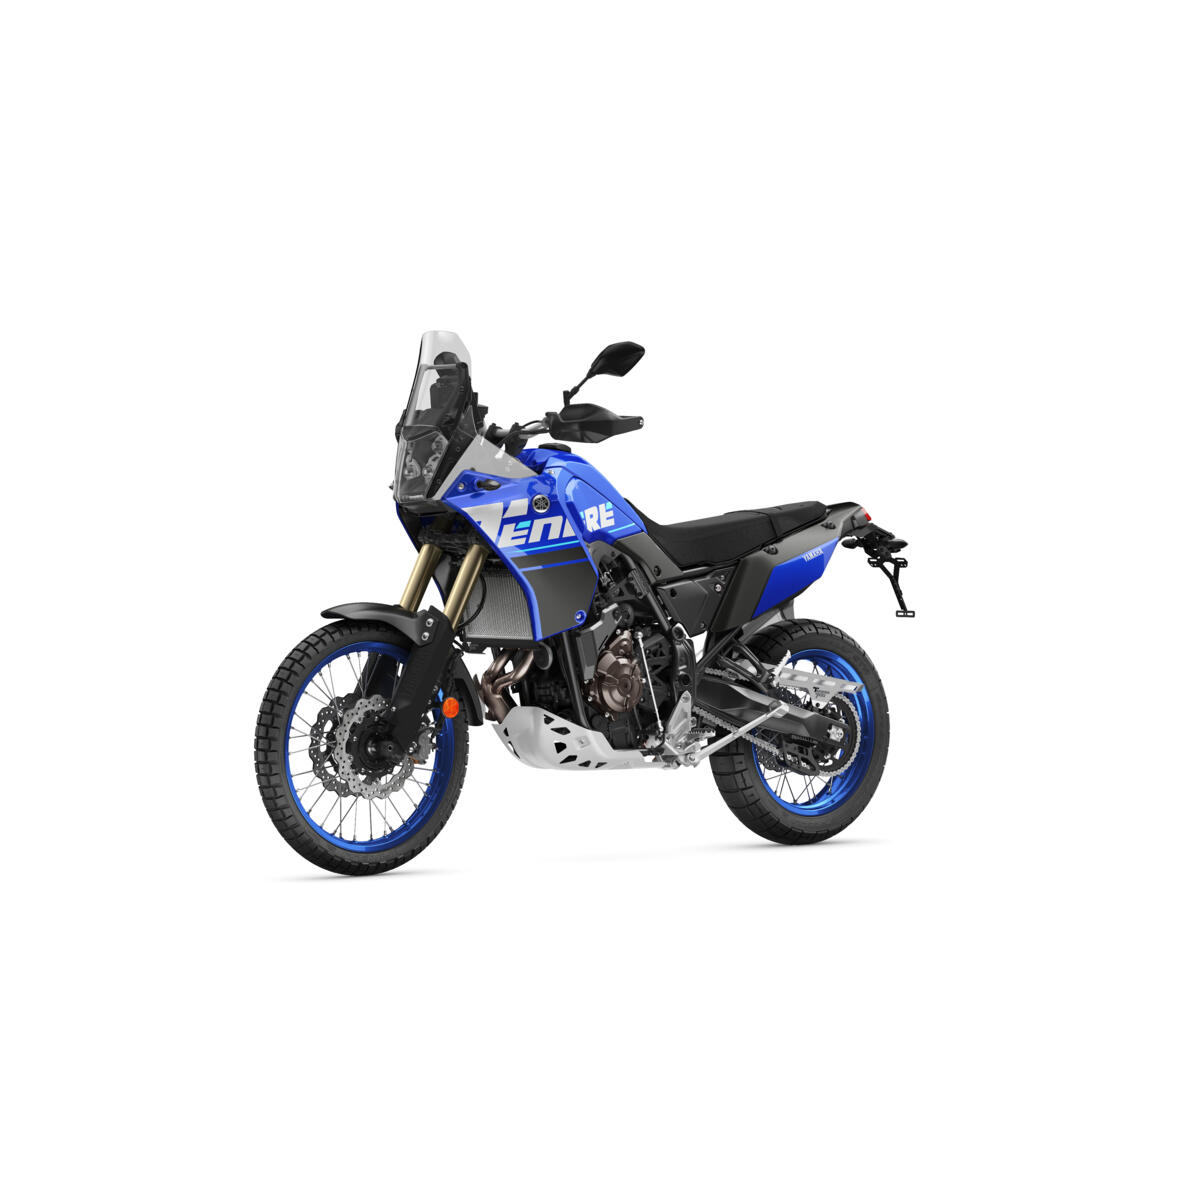 With its off-road credentials, the Ténéré 700 is meant to be ridden dirty! To give you and your motorcycle that edge of the seat adrenaline rush, the Rally Pack offers some of the most exciting and sporty Yamaha Genuine Accessories. Giving you the freedom to change riding position dynamically, the rally seat increases the authentic rally look of your Ténéré 700. To make it also sound like a true rally machine, the Akrapovič slip-on gives a throaty-rich exhaust note. Taking your bike off road can push the drive-train to its edges, and this is why the chain guide, chain guard and radiator protector are there to safeguard important elements of your Ténéré 700. For a sharp and dynamic look, the Rally Pack also includes number plate holder, tank pad and LED blinkers. The Rally Pack is your ticket to the ultimate sideways drifting action!